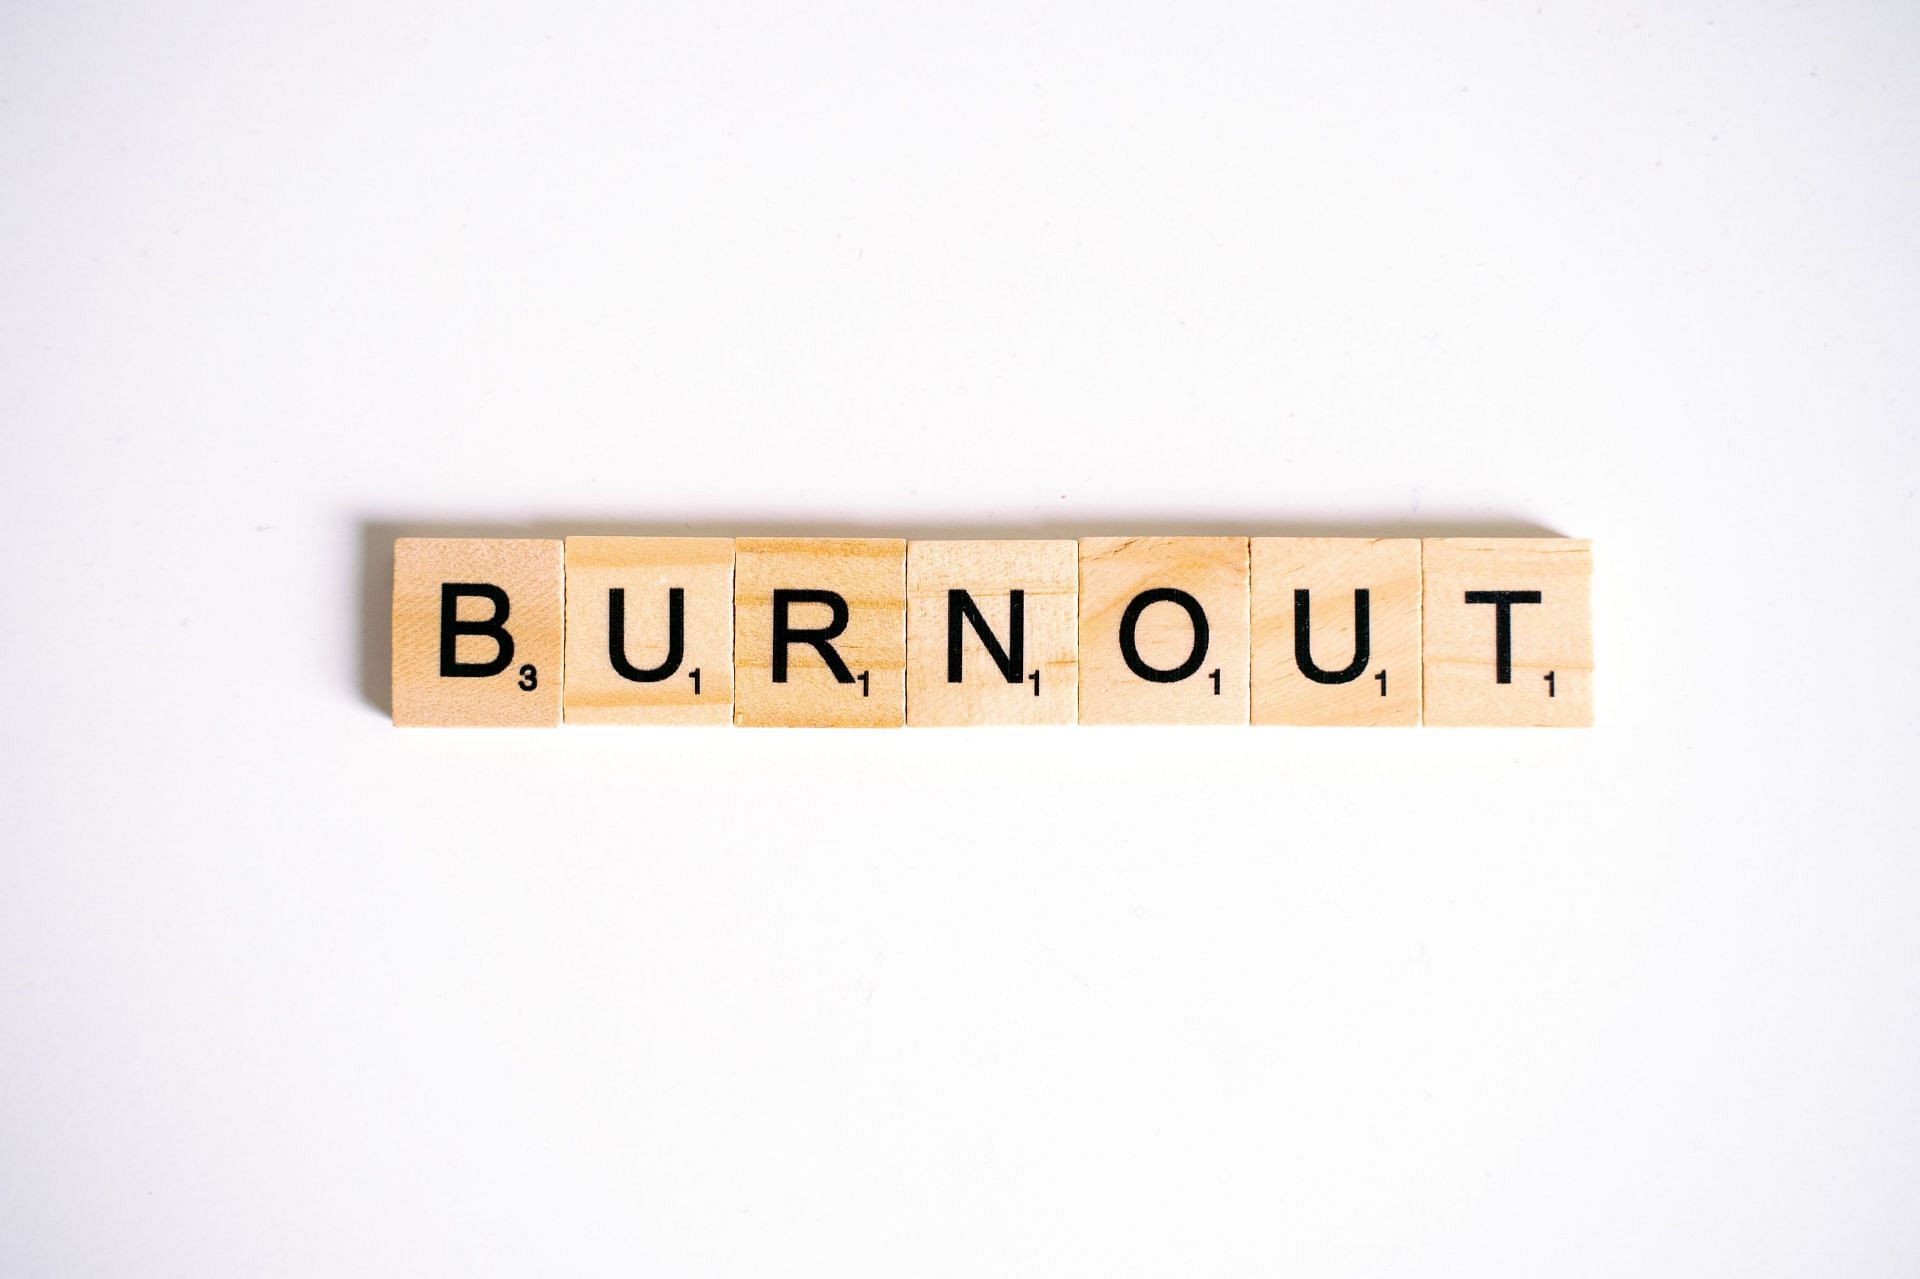 Burnout is insidious and can directly damage mental health. (Photo via Pexels/ Anna Tarazevich)